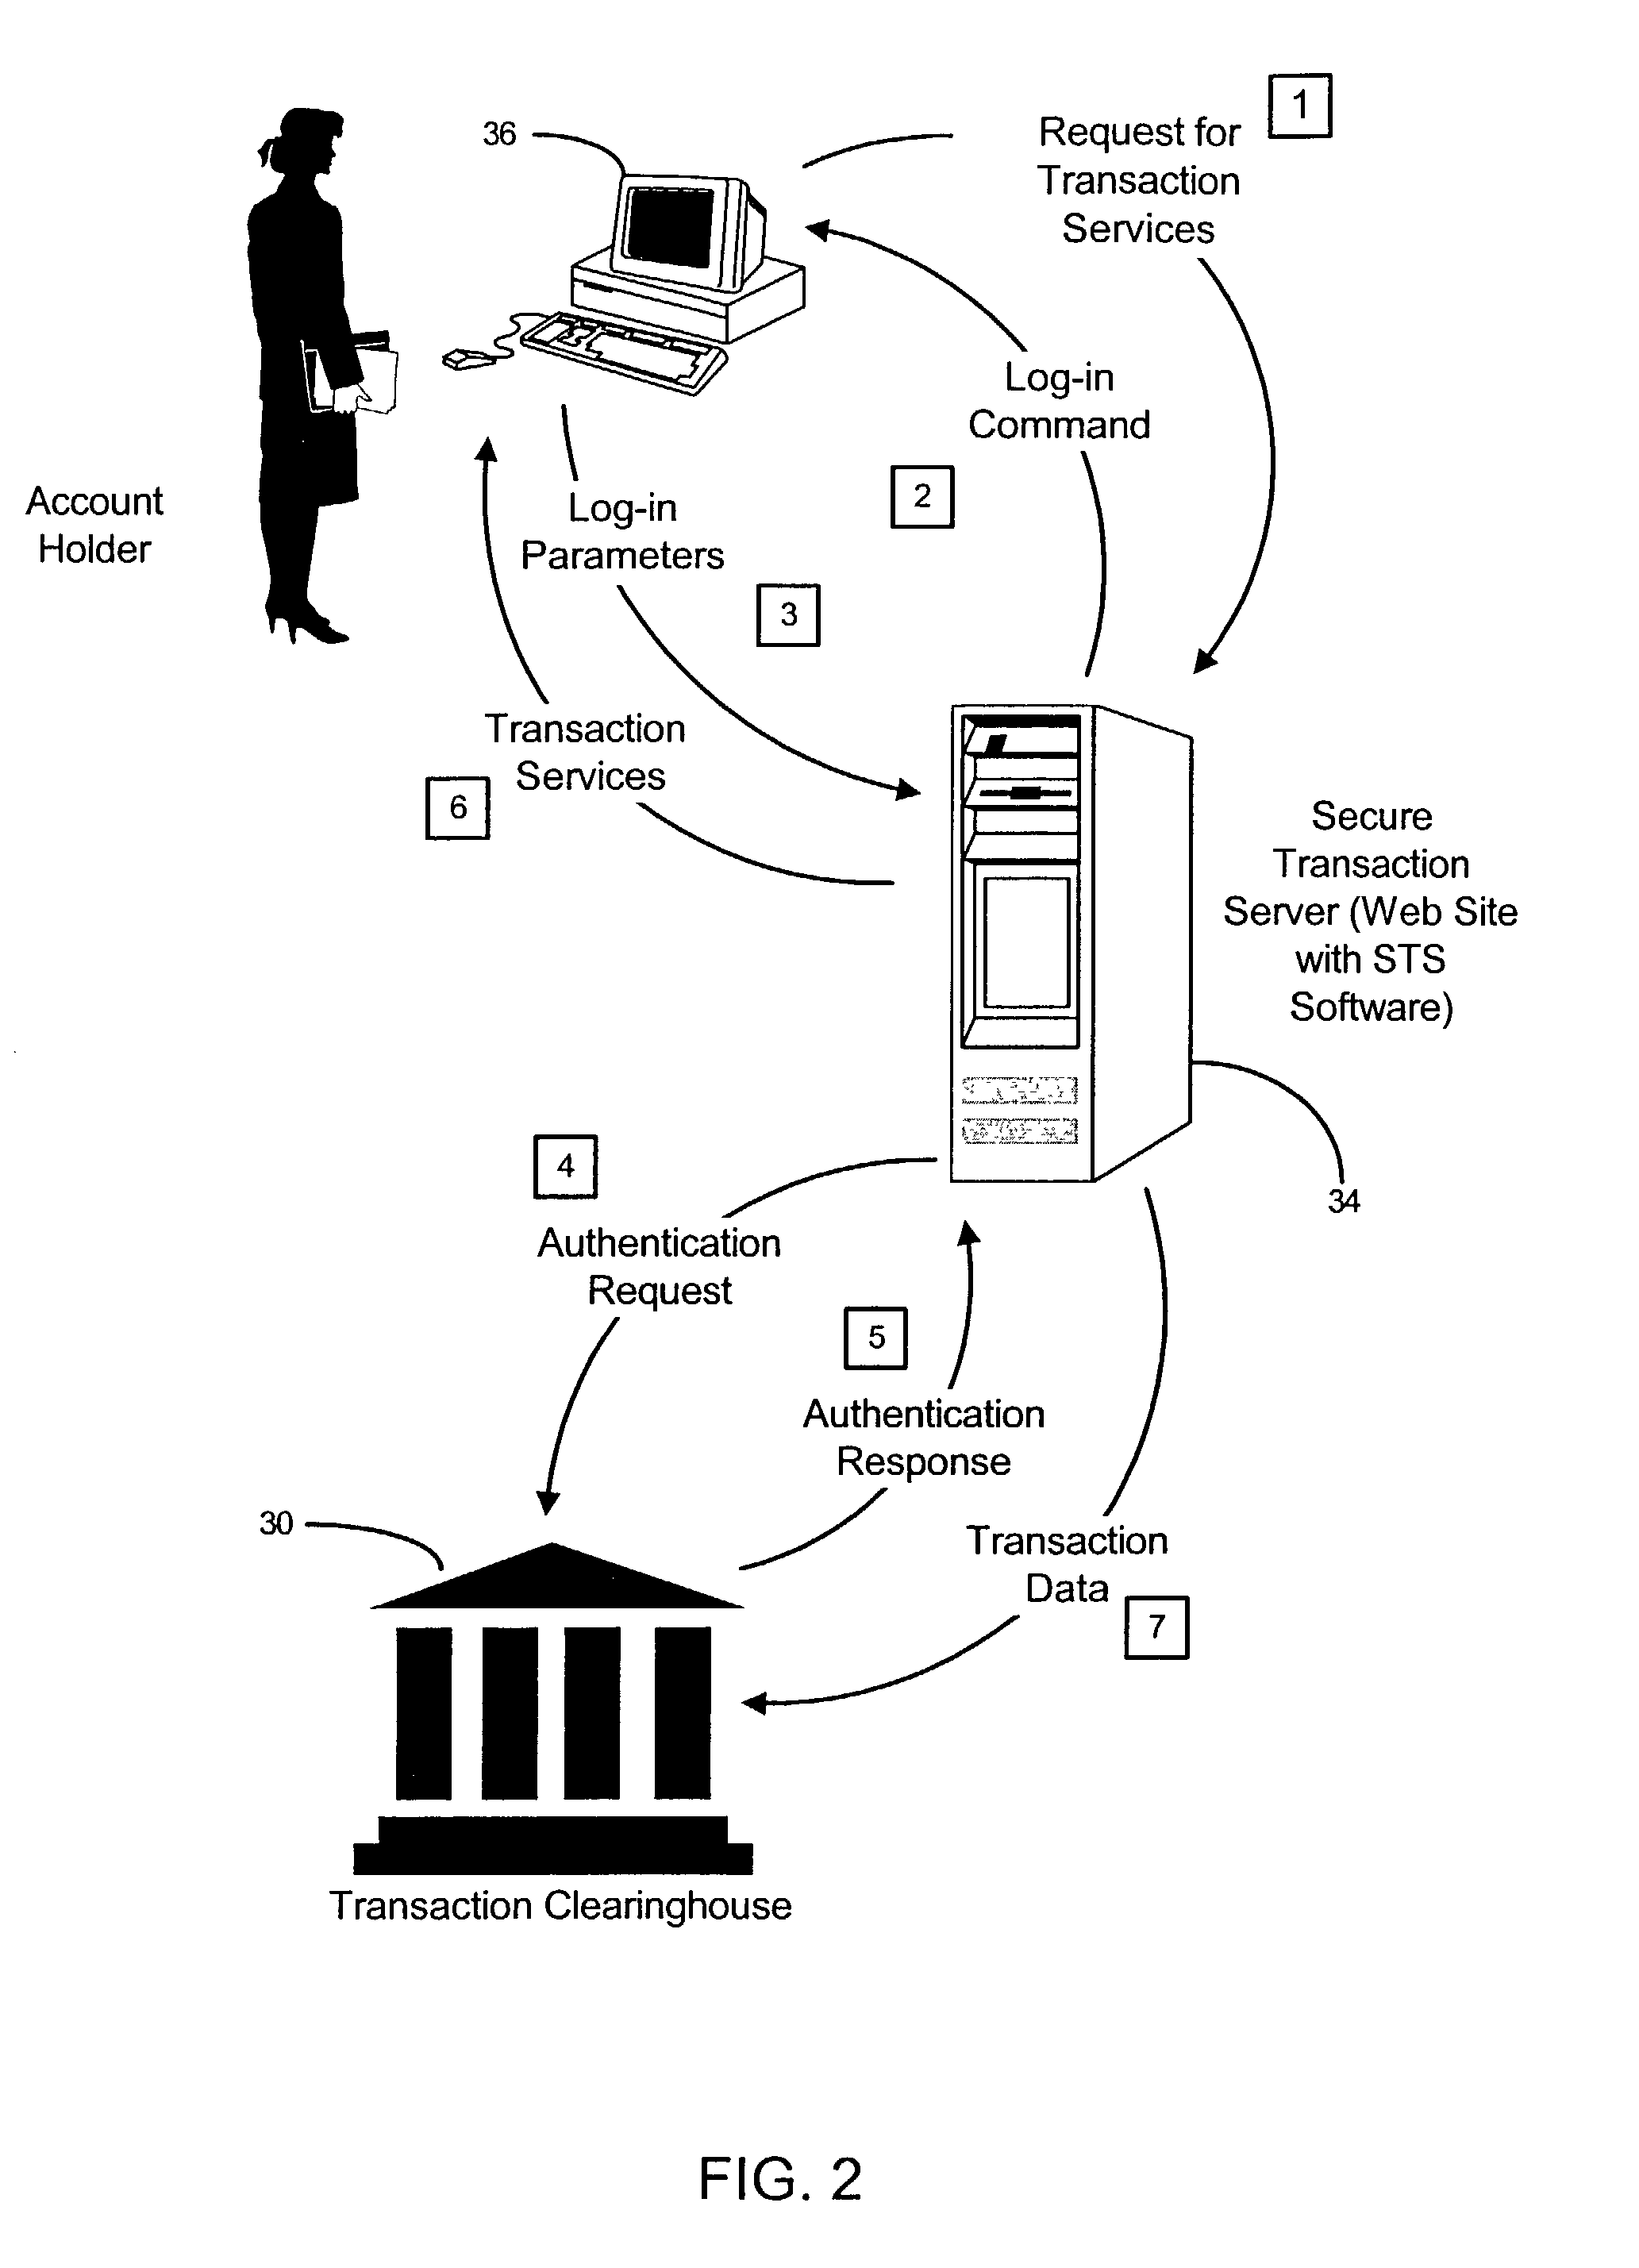 Method and system for controlling access, by an authentication server, to protected computer resources provided via an internet protocol network